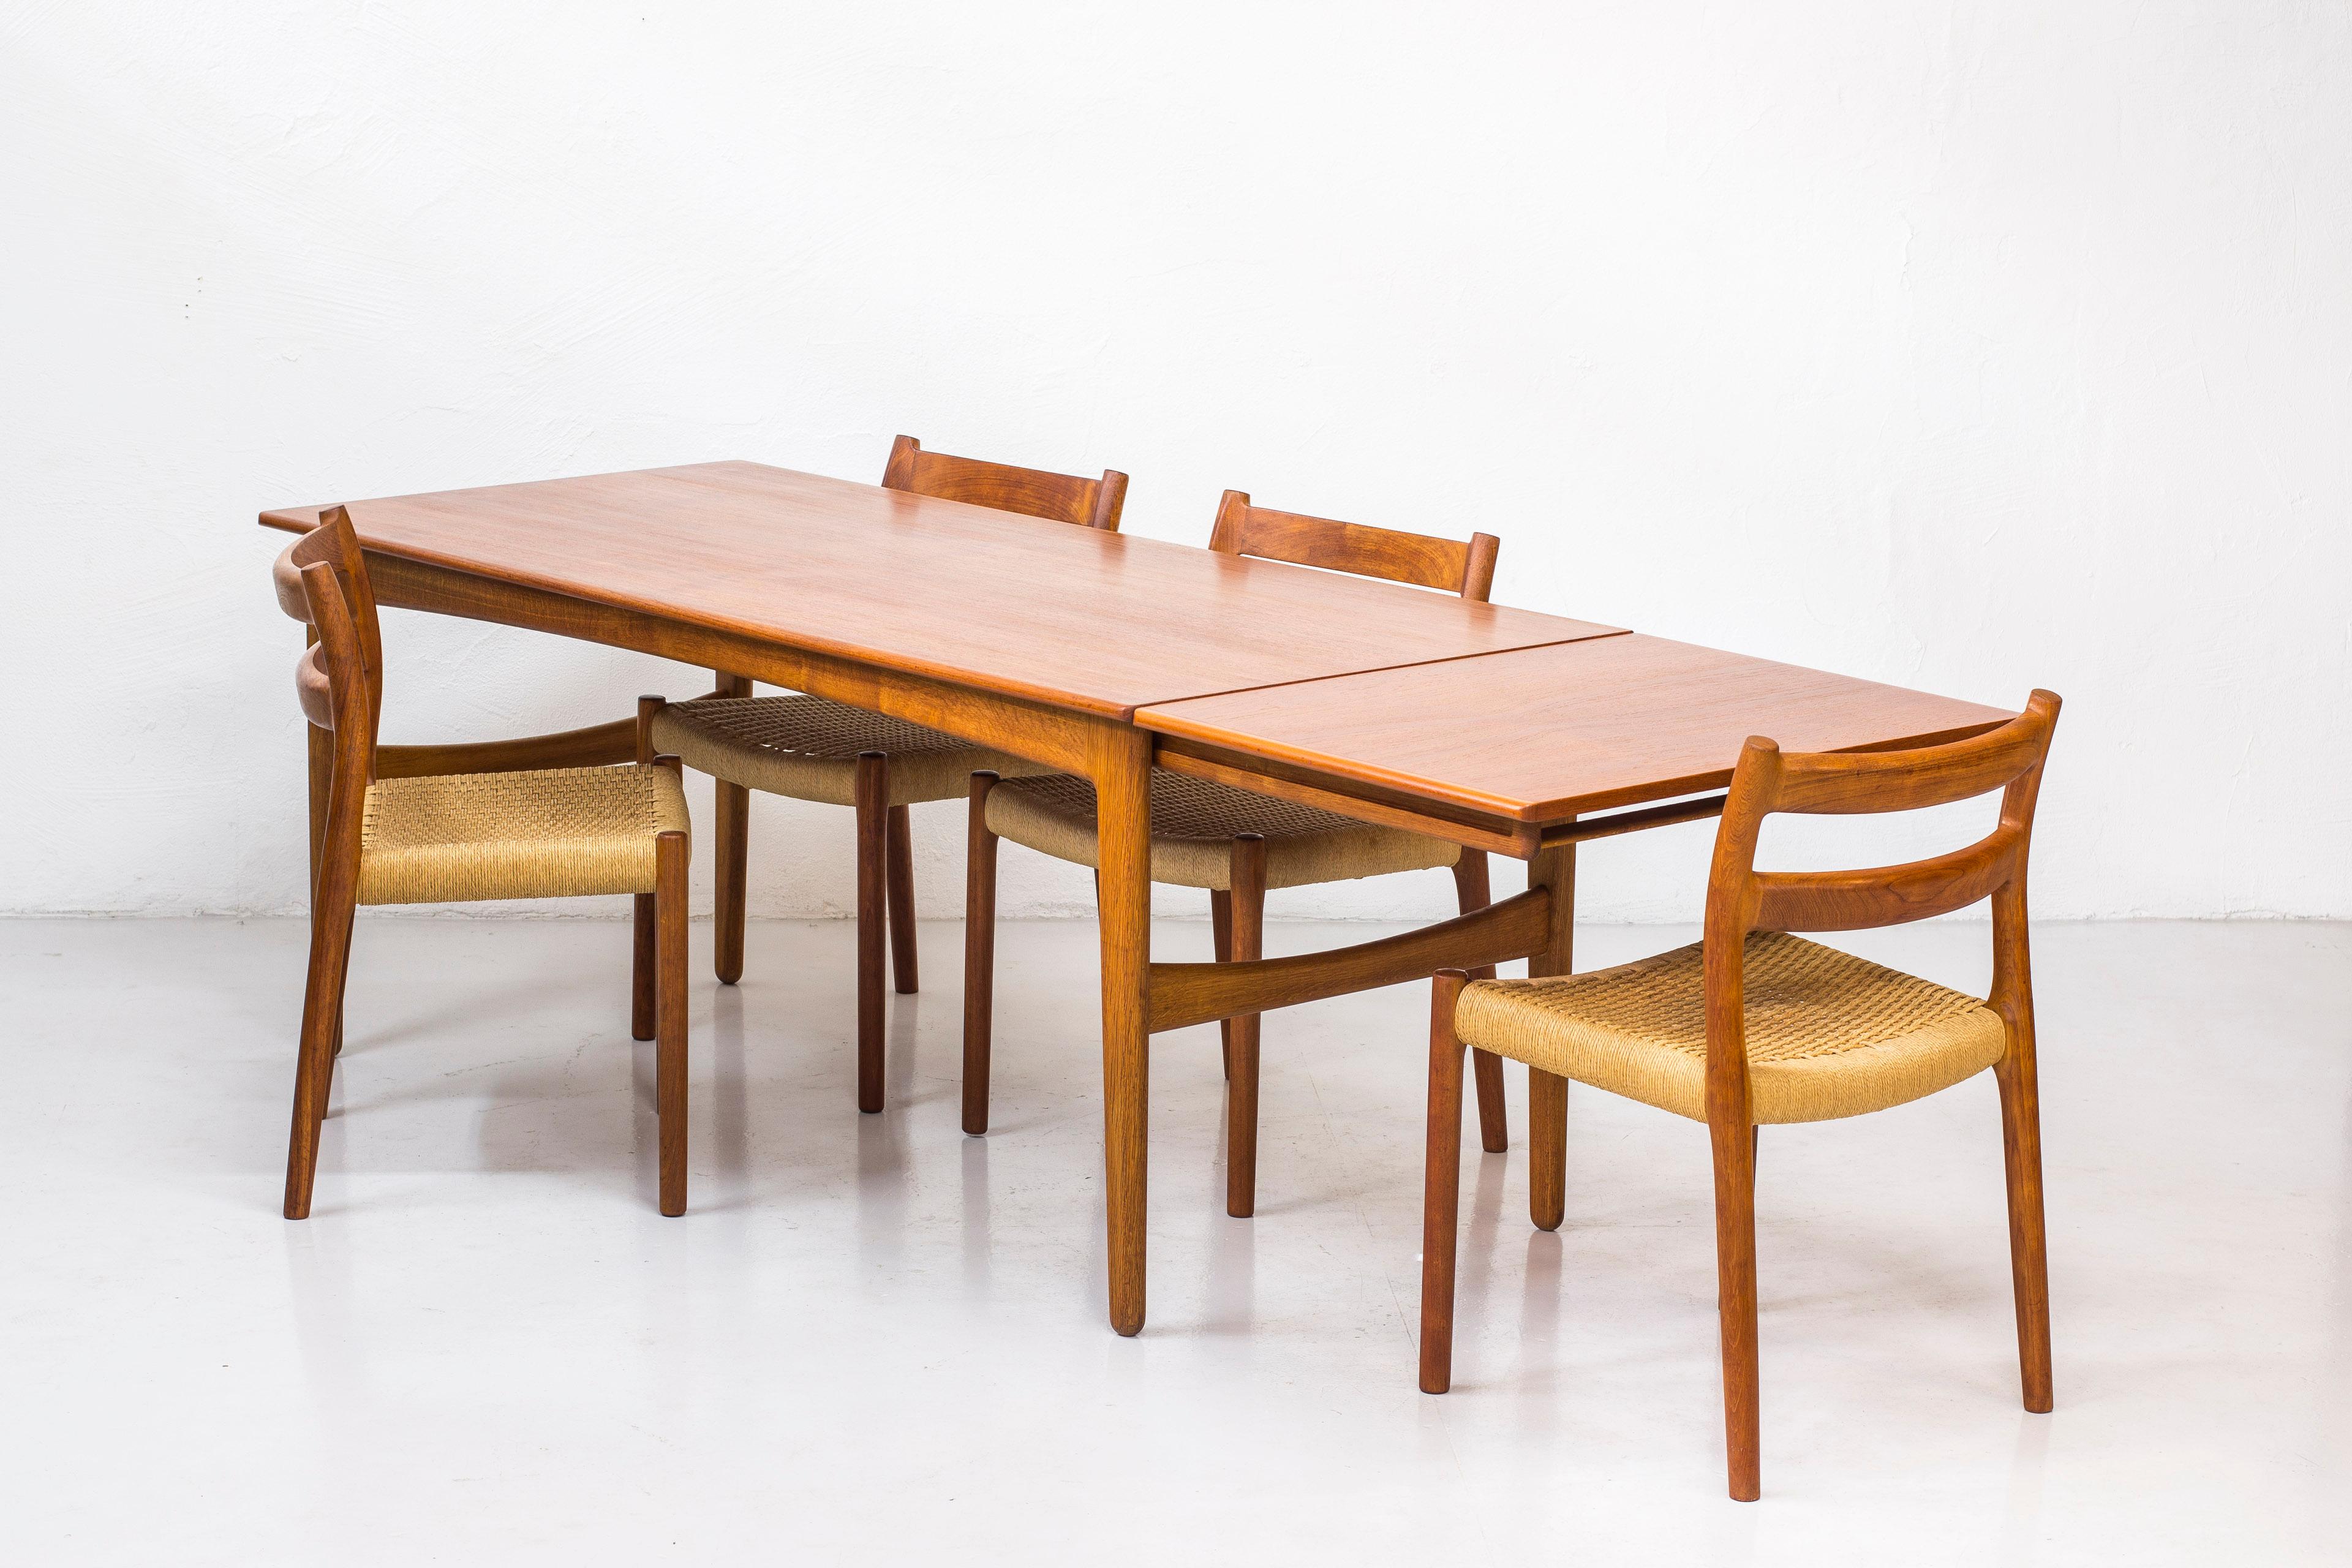 Dining table design by Knud Andersen in Denmark during the 1950s. Produced by cabinet maker J. C. A Andersen. Solid oak legs with teak tabletop. Tabletop extensions on each side hidden underneath the main table. Sits eight to ten people with ease.